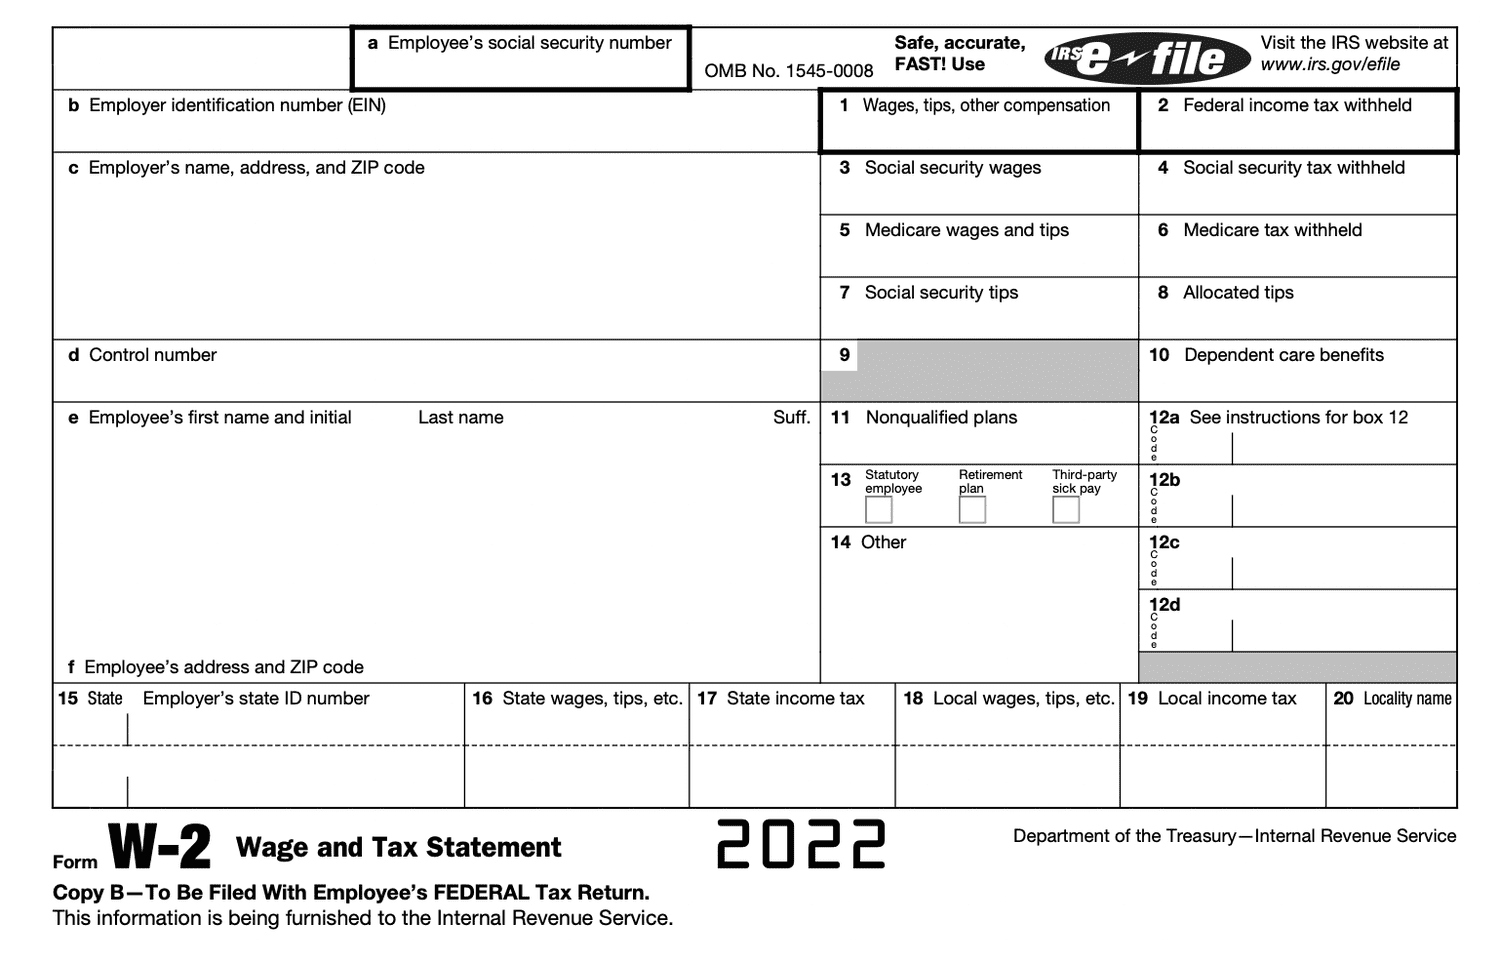 Form W-2 Wage And Tax Statement: What It Is And How To Read It pertaining to 2 W2 Forms Different Employer